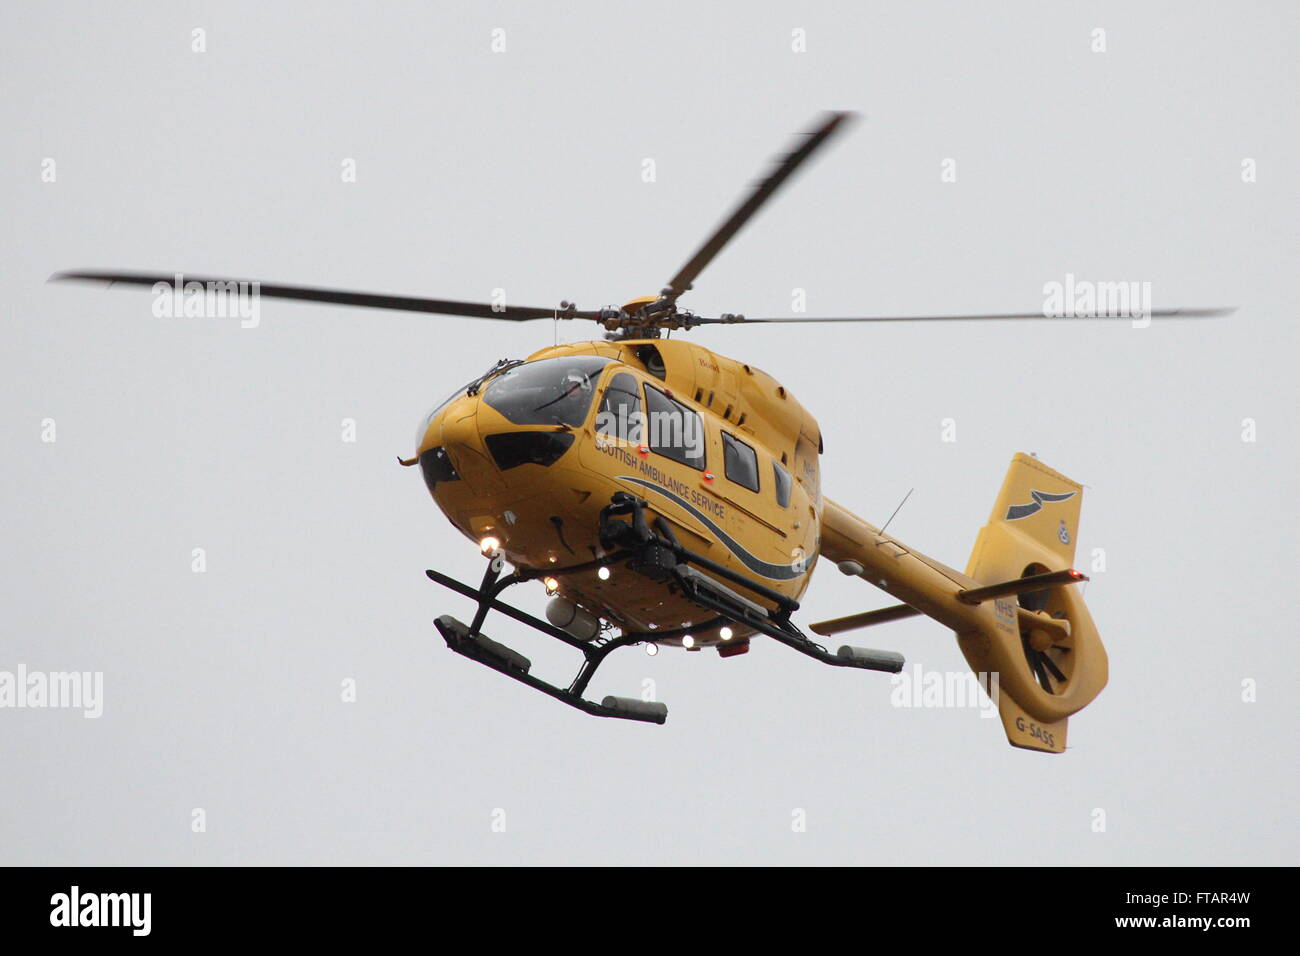 G-SASS, a Eurocopter EC145 (Airbus H145) operated by Bond Helicopters for NHS Scotland's Air Ambulance Service, at Prestwick Airport in Ayrshire. Stock Photo